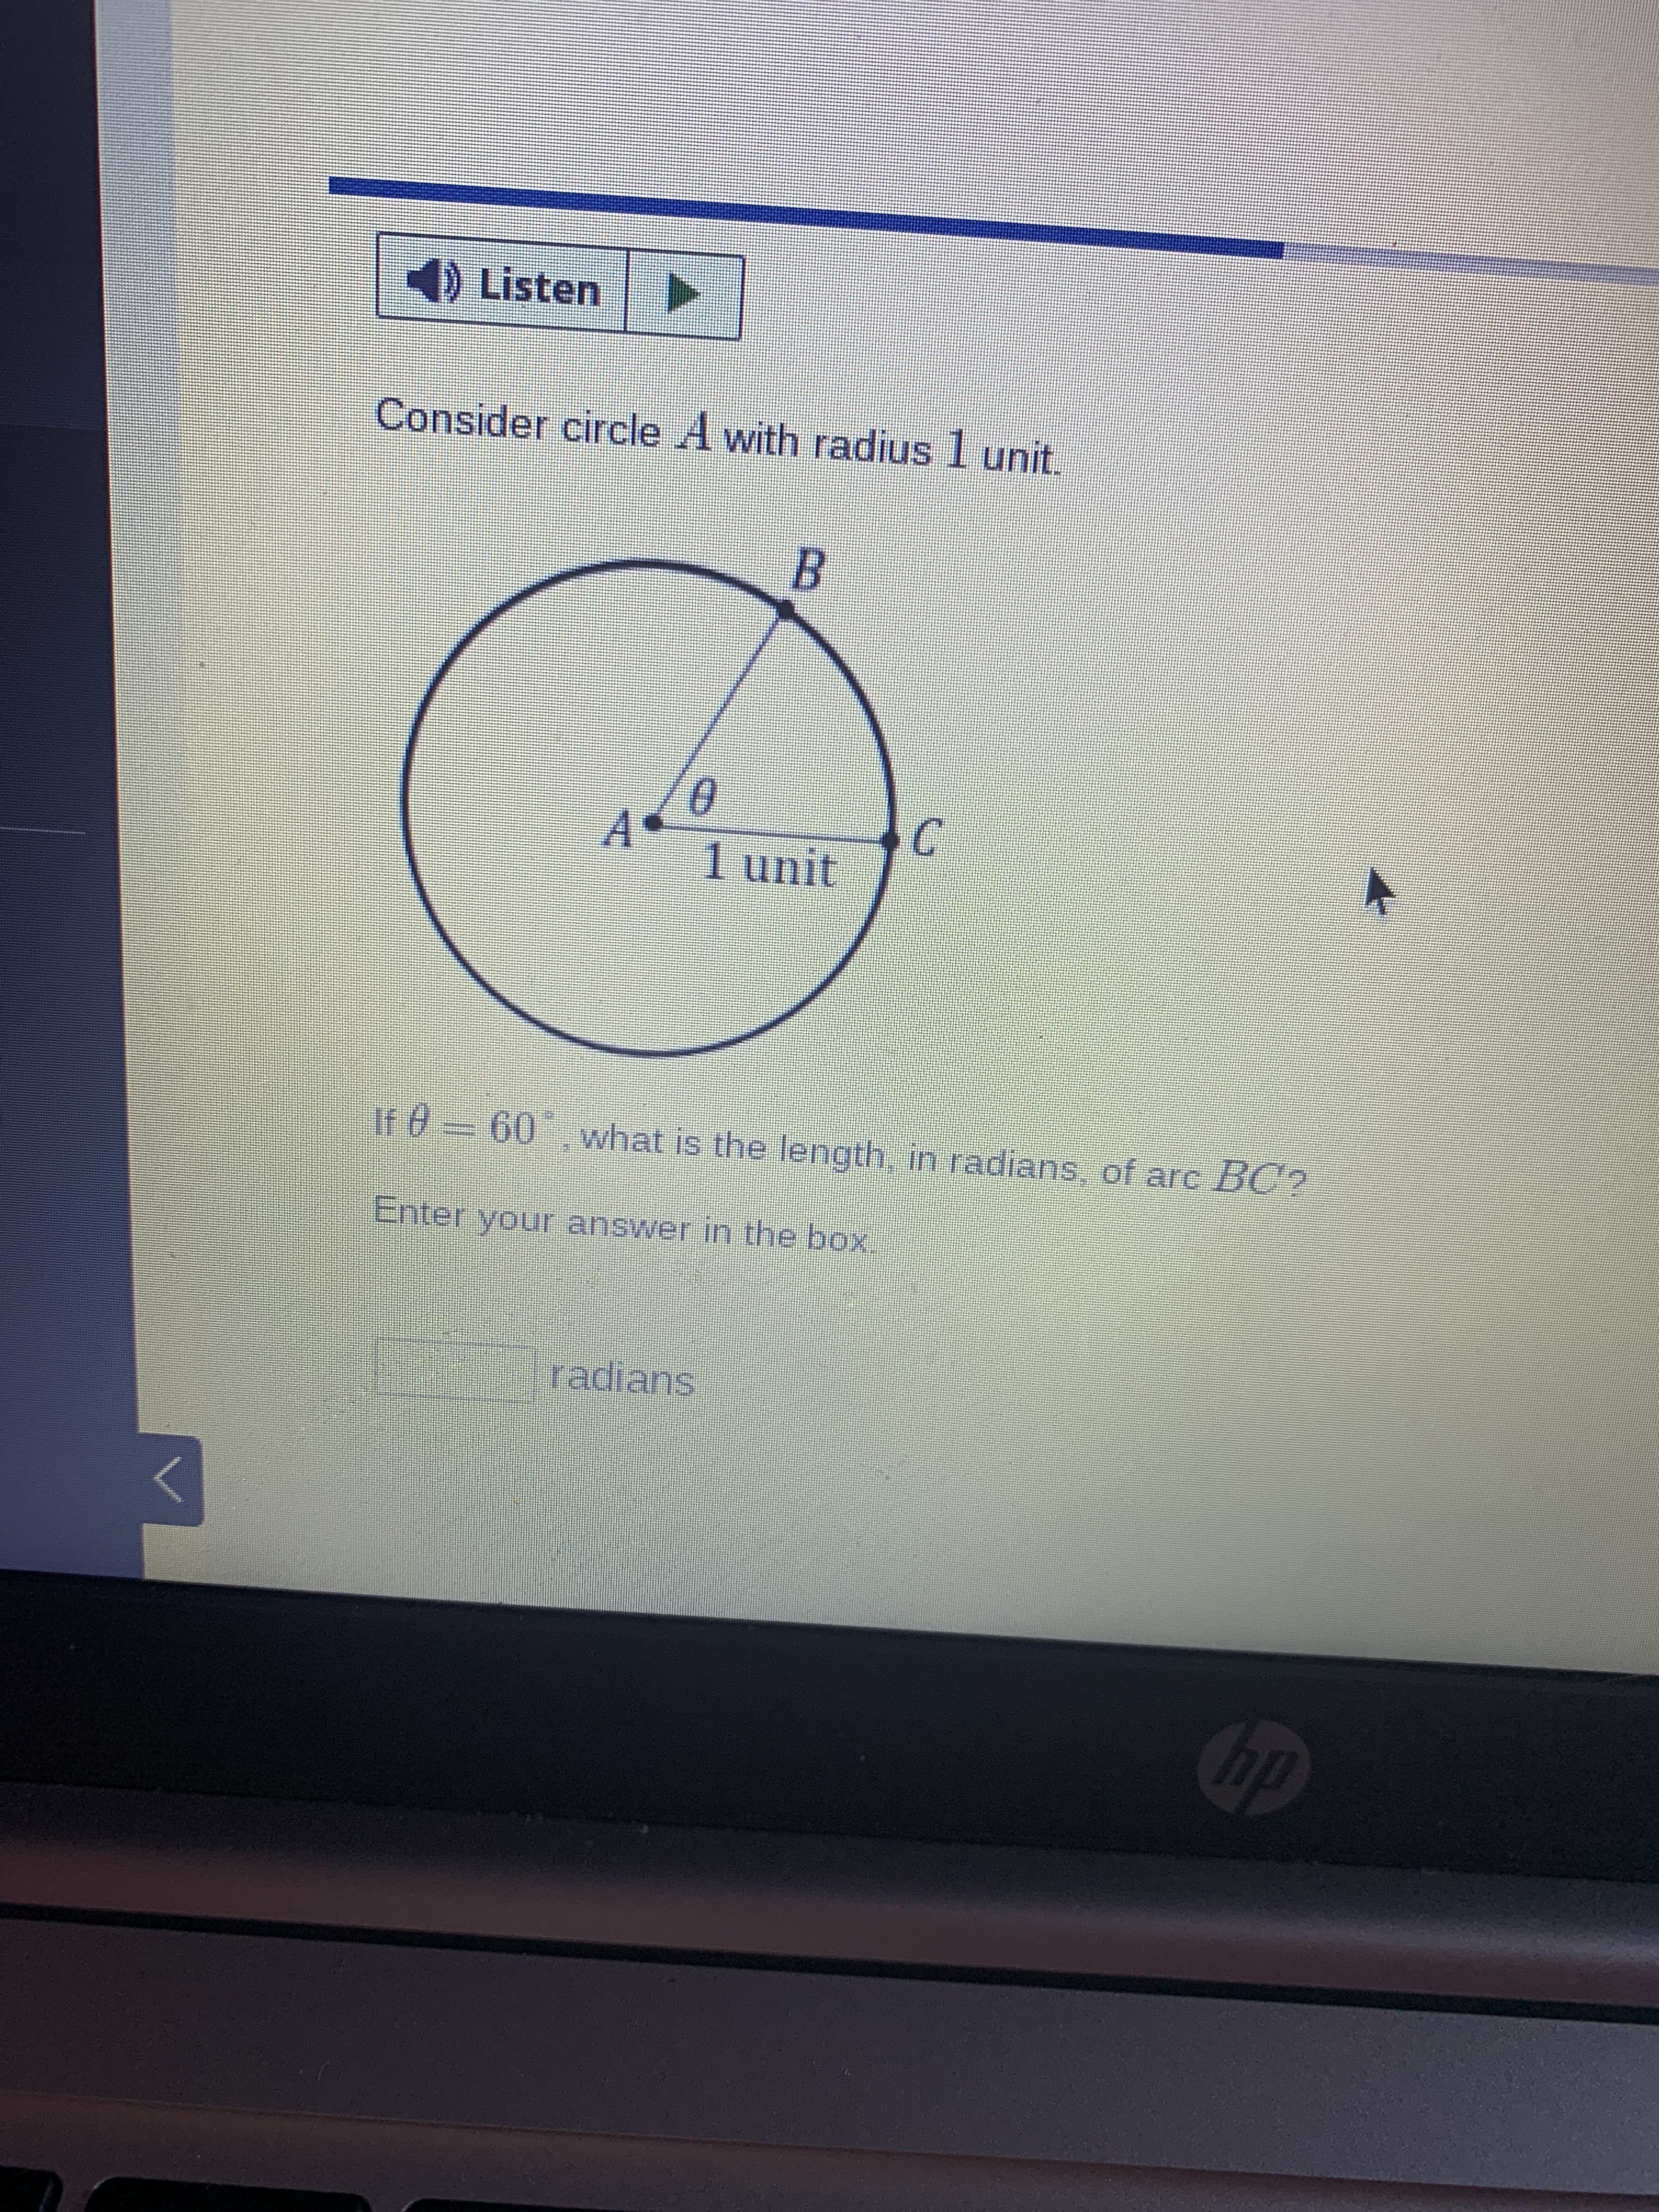 ) Listen
Consider circle A with radius 1 unit.
B.
1 unit
C.
If 0 60, what is the length, in radians, of arc BC?
Enter your answer in the box.
radians
dy
